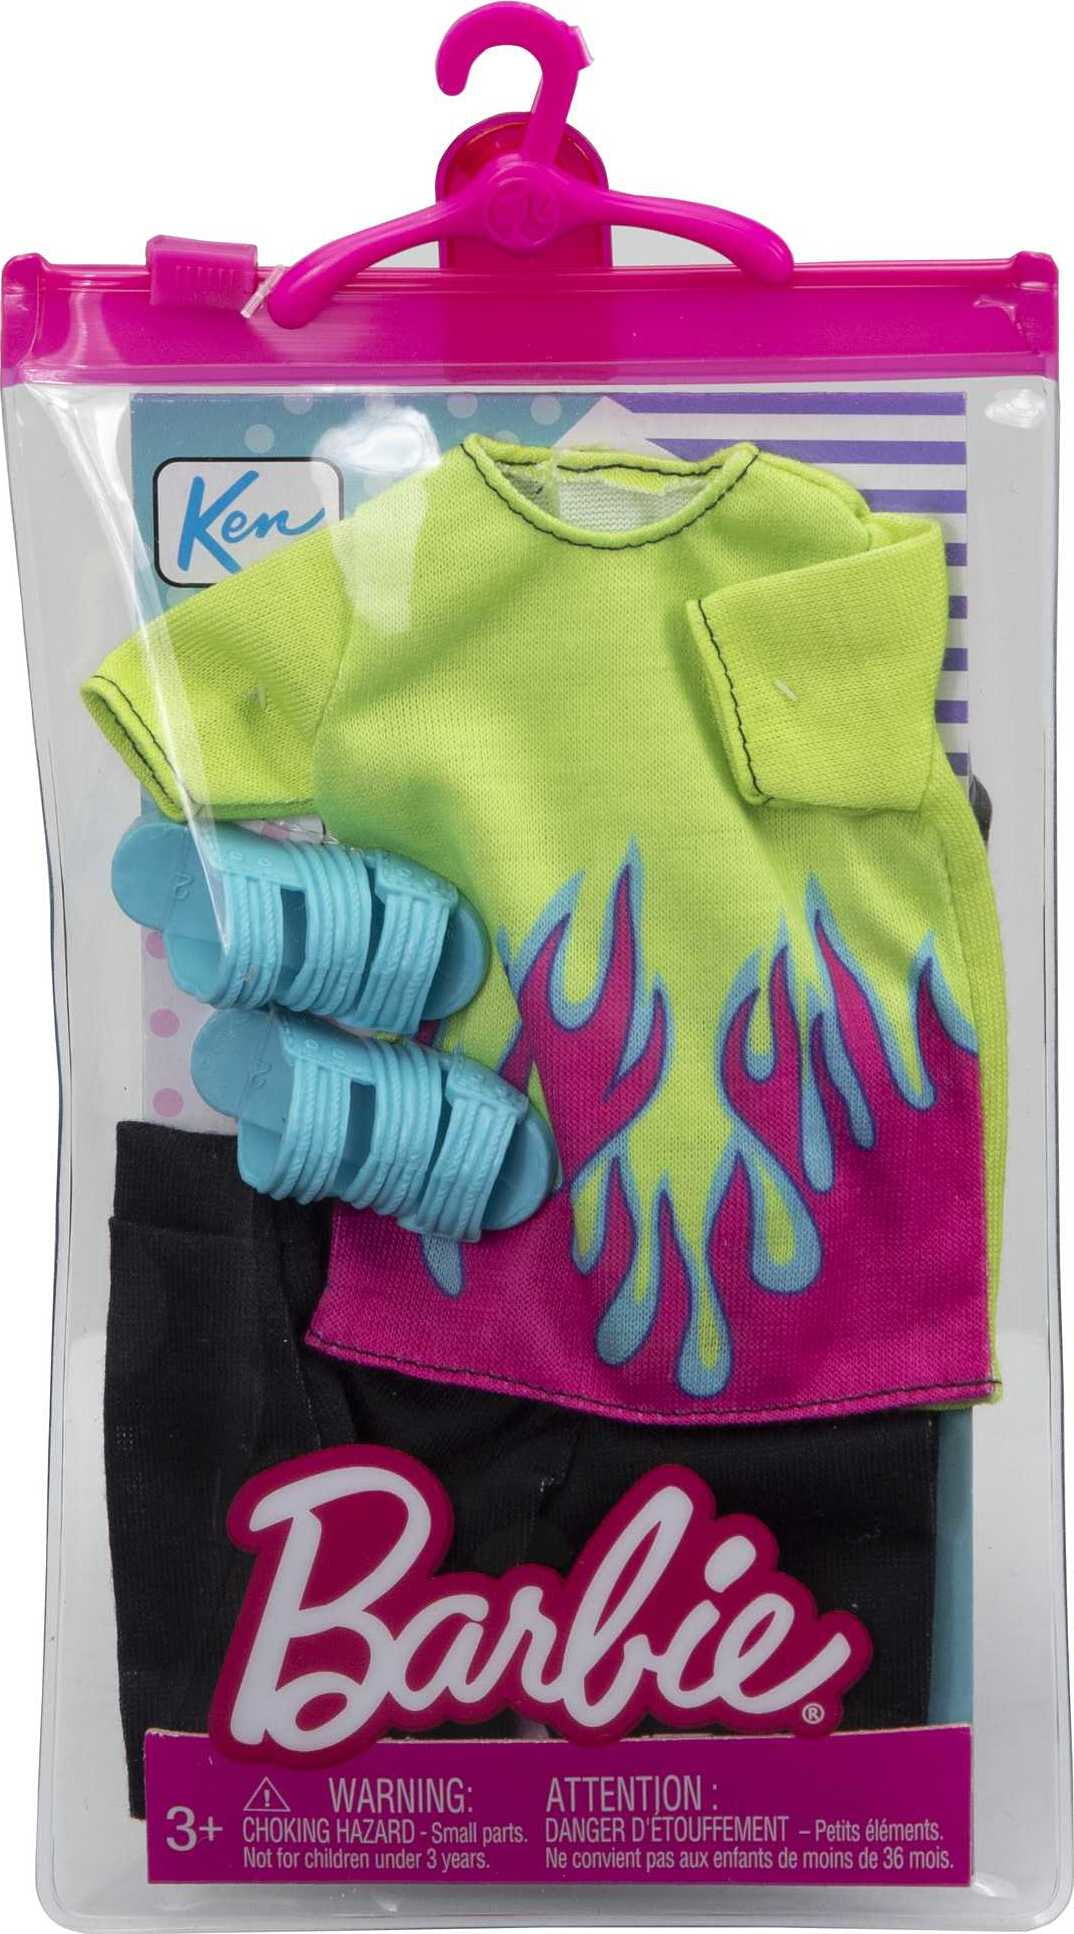 Barbie fashions ken doll clothes pack, neon green shirt with flame